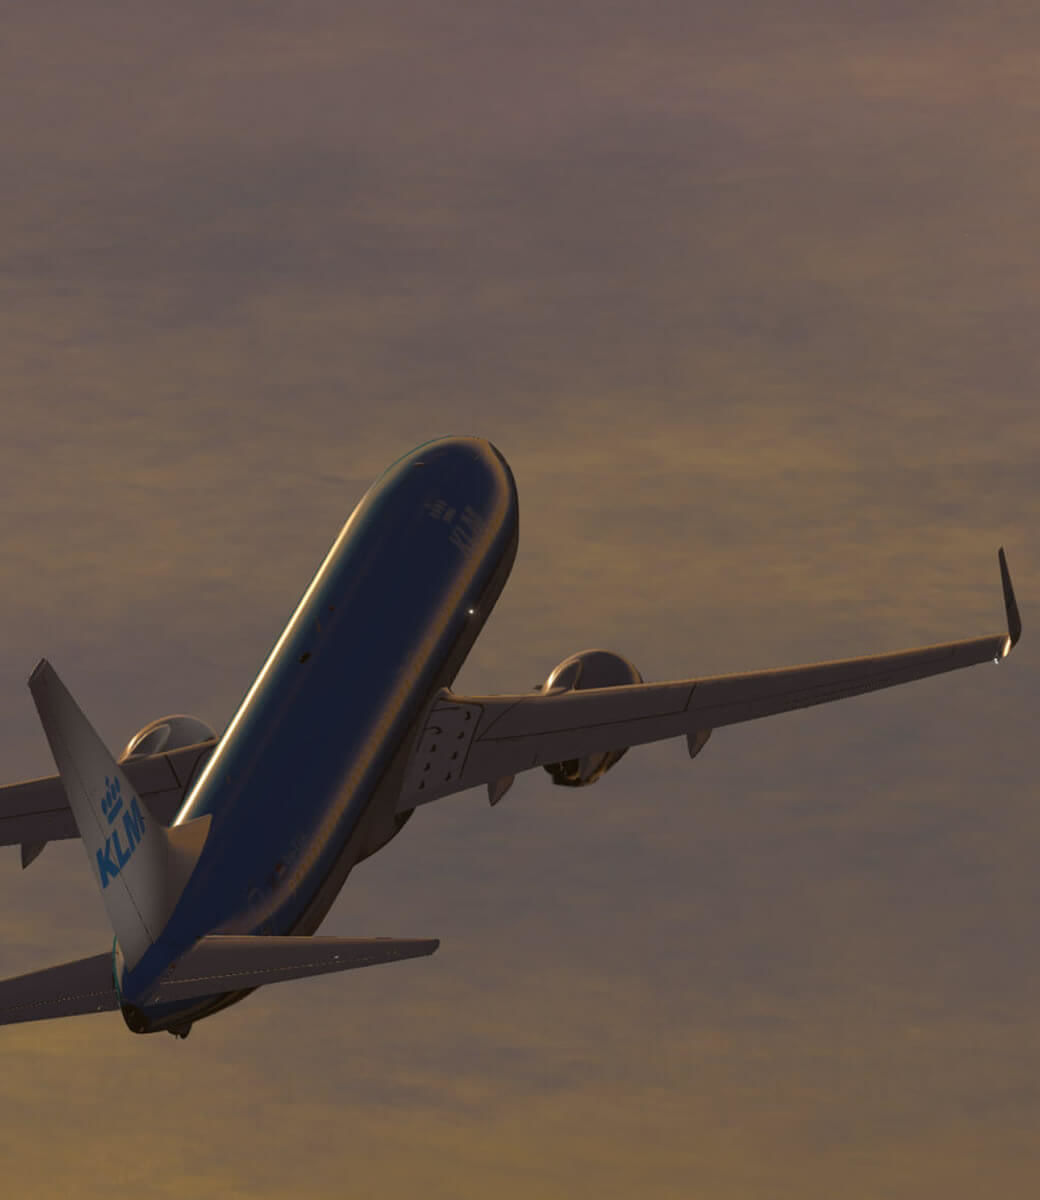 x plane for mac review